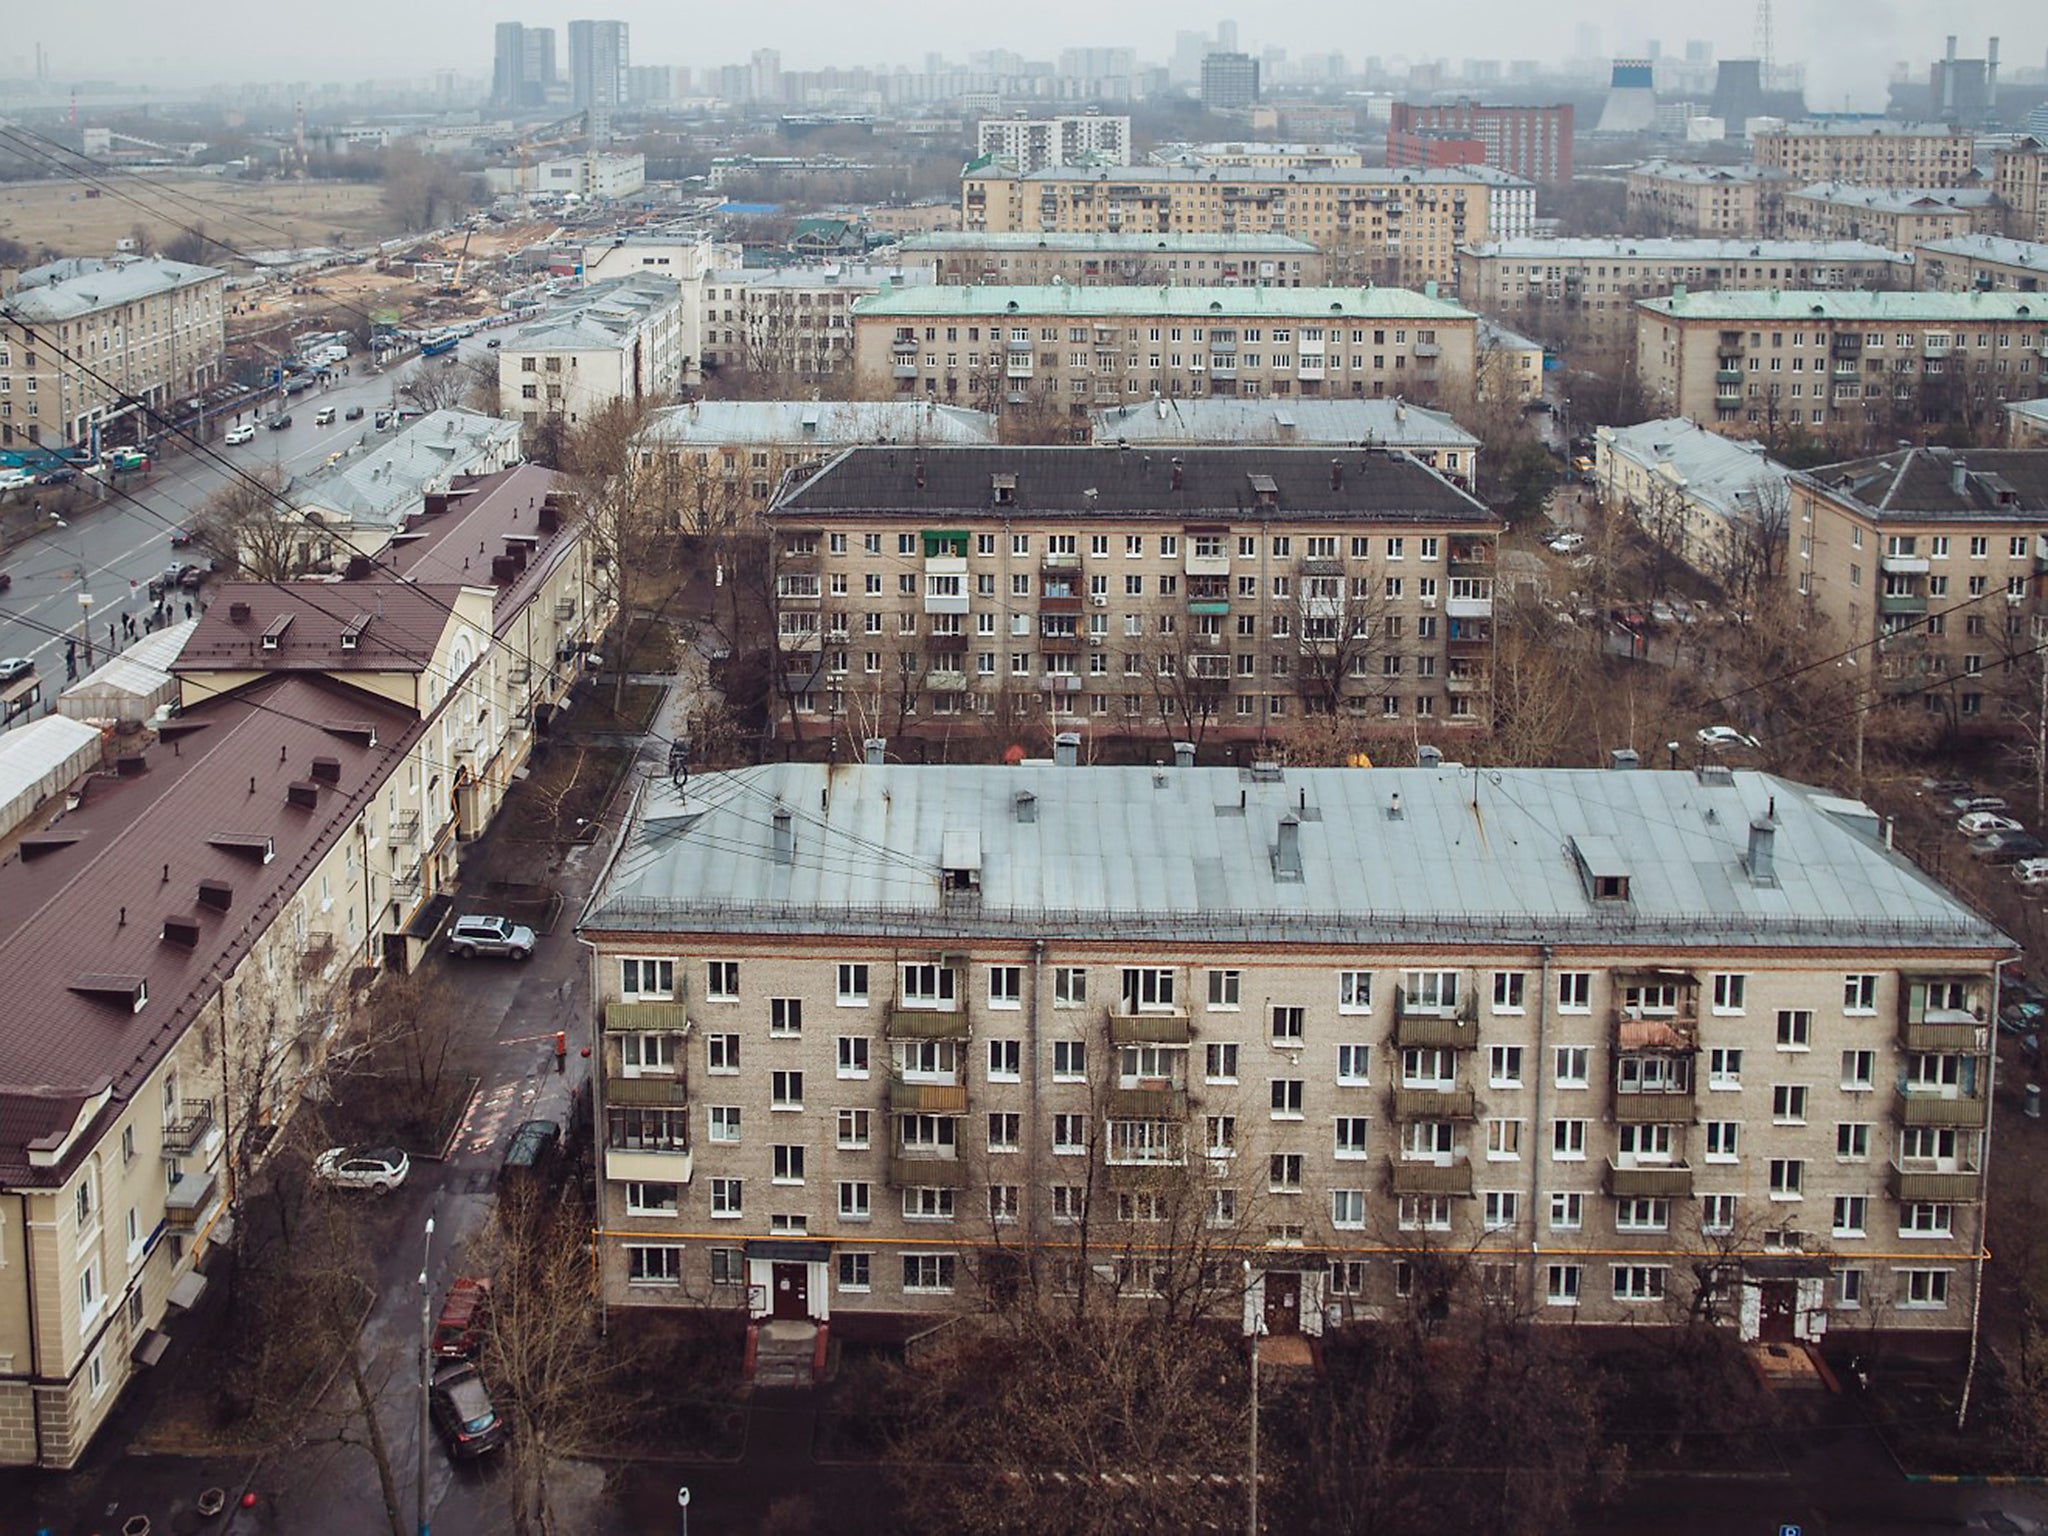 1.6 million people are set to be moved as part of Moscow’s regeneration plans (Max Avdeev/The Washington Post)